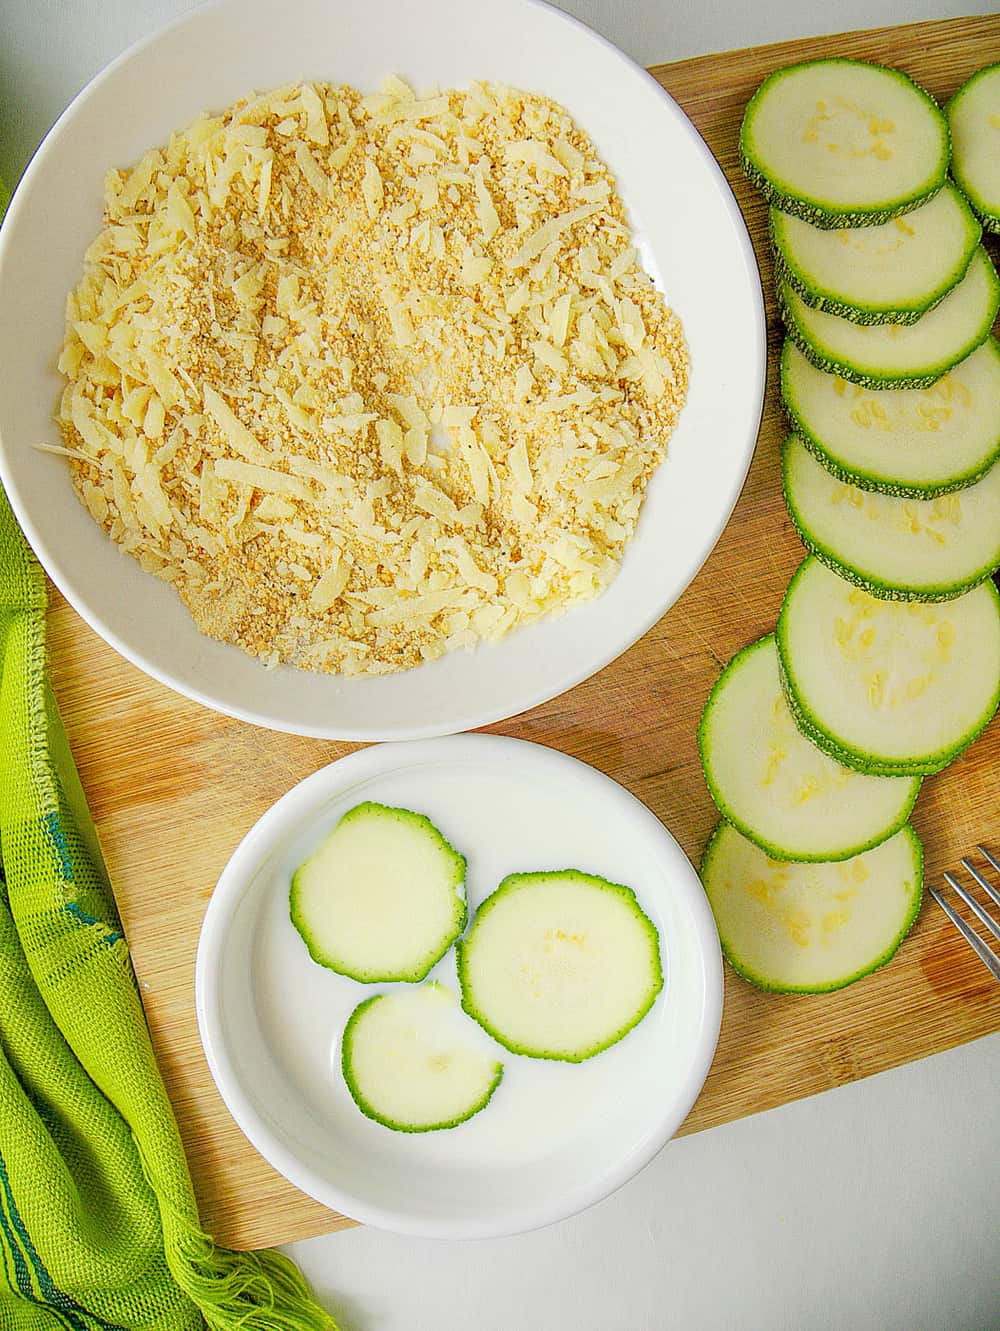 ingredients for zucchini chips